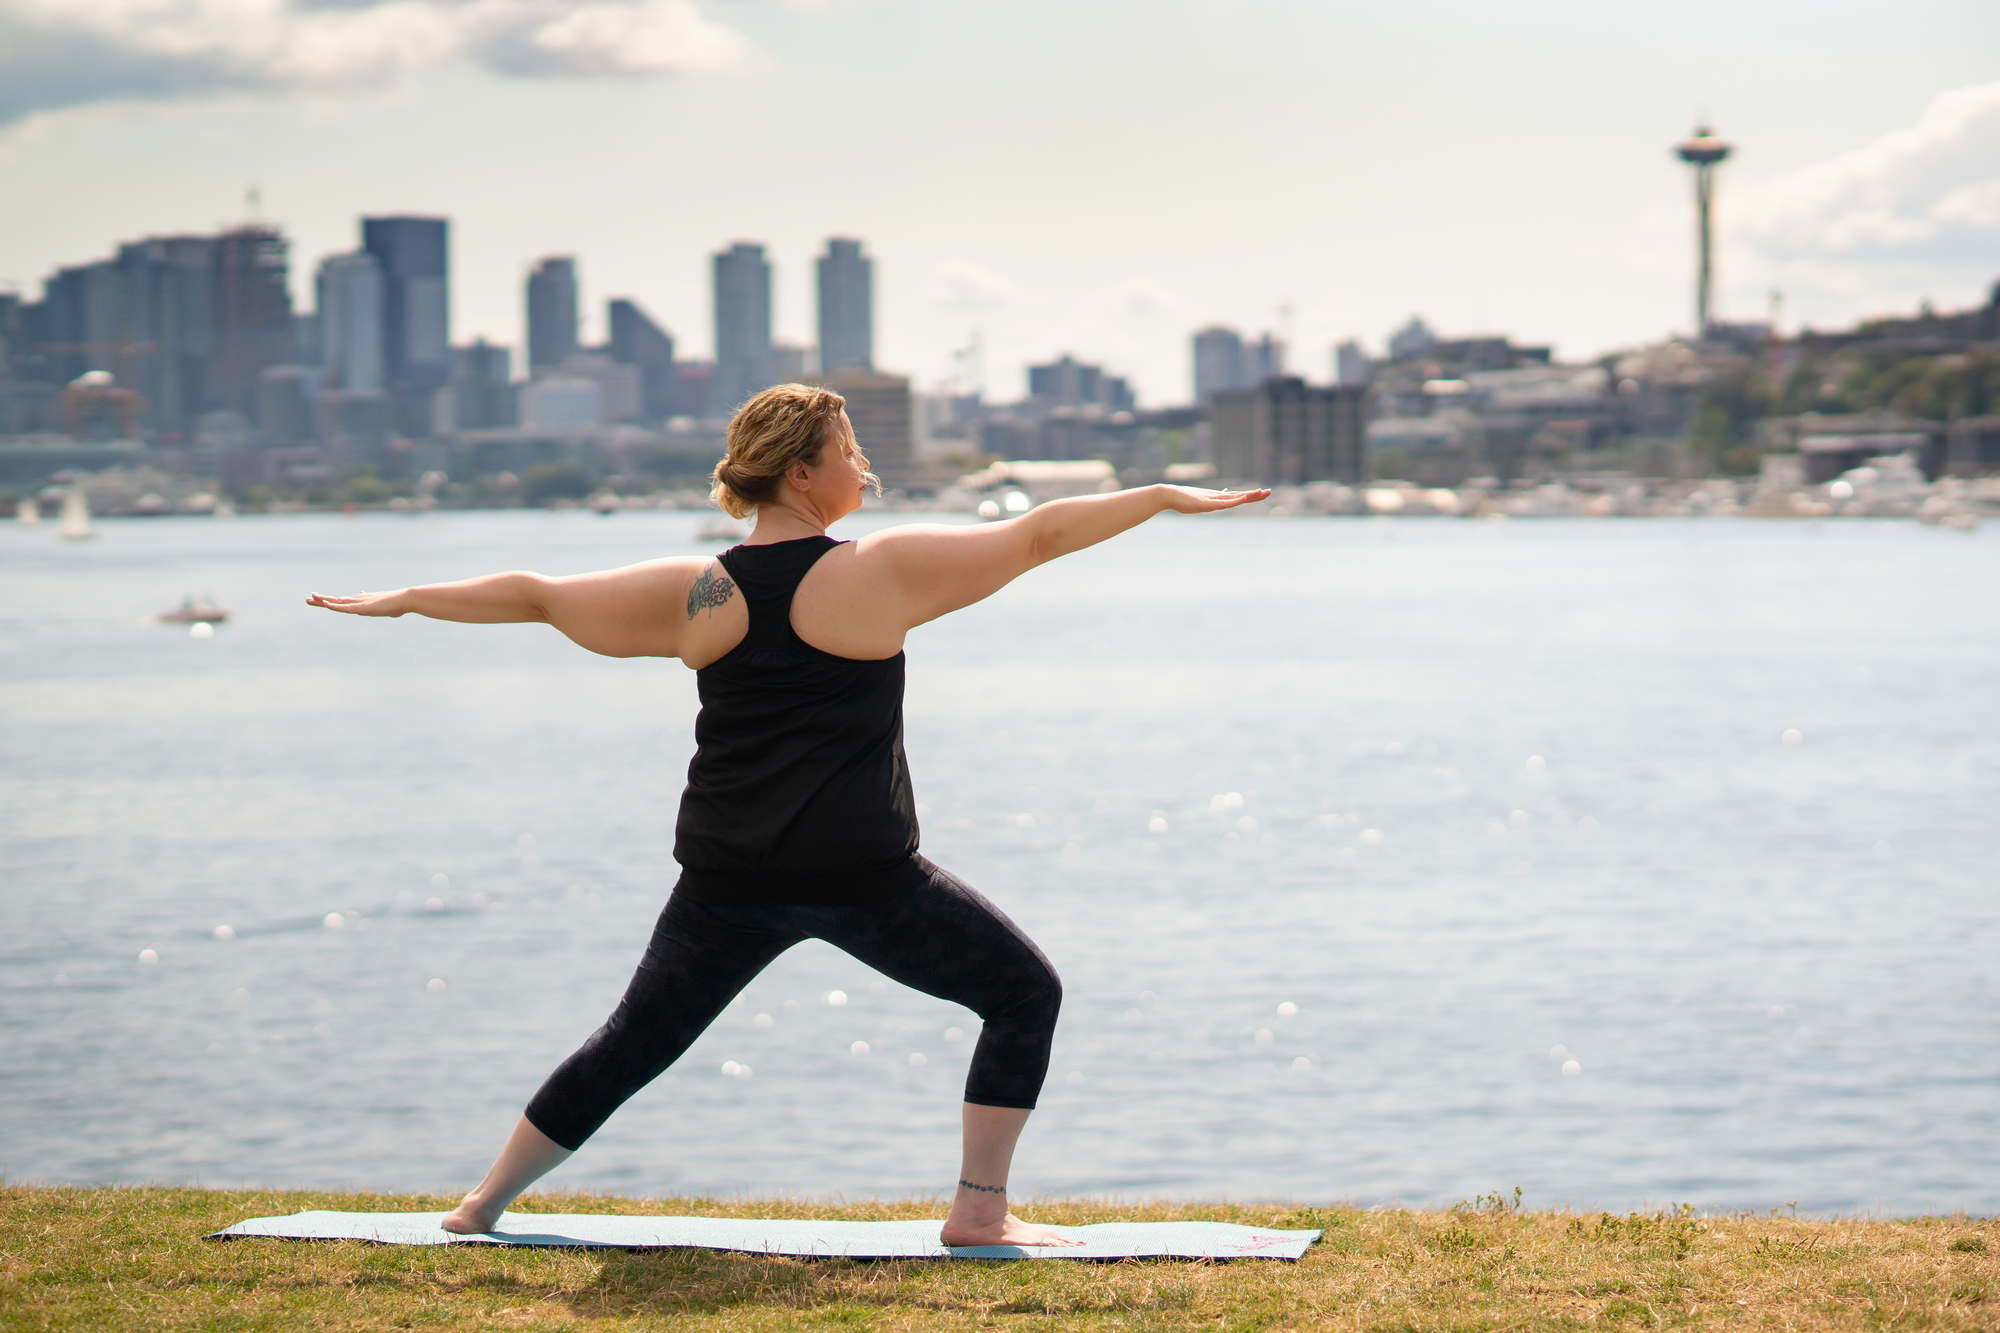 A woman poses on a yoga mat before the city skyline in Seattle WA